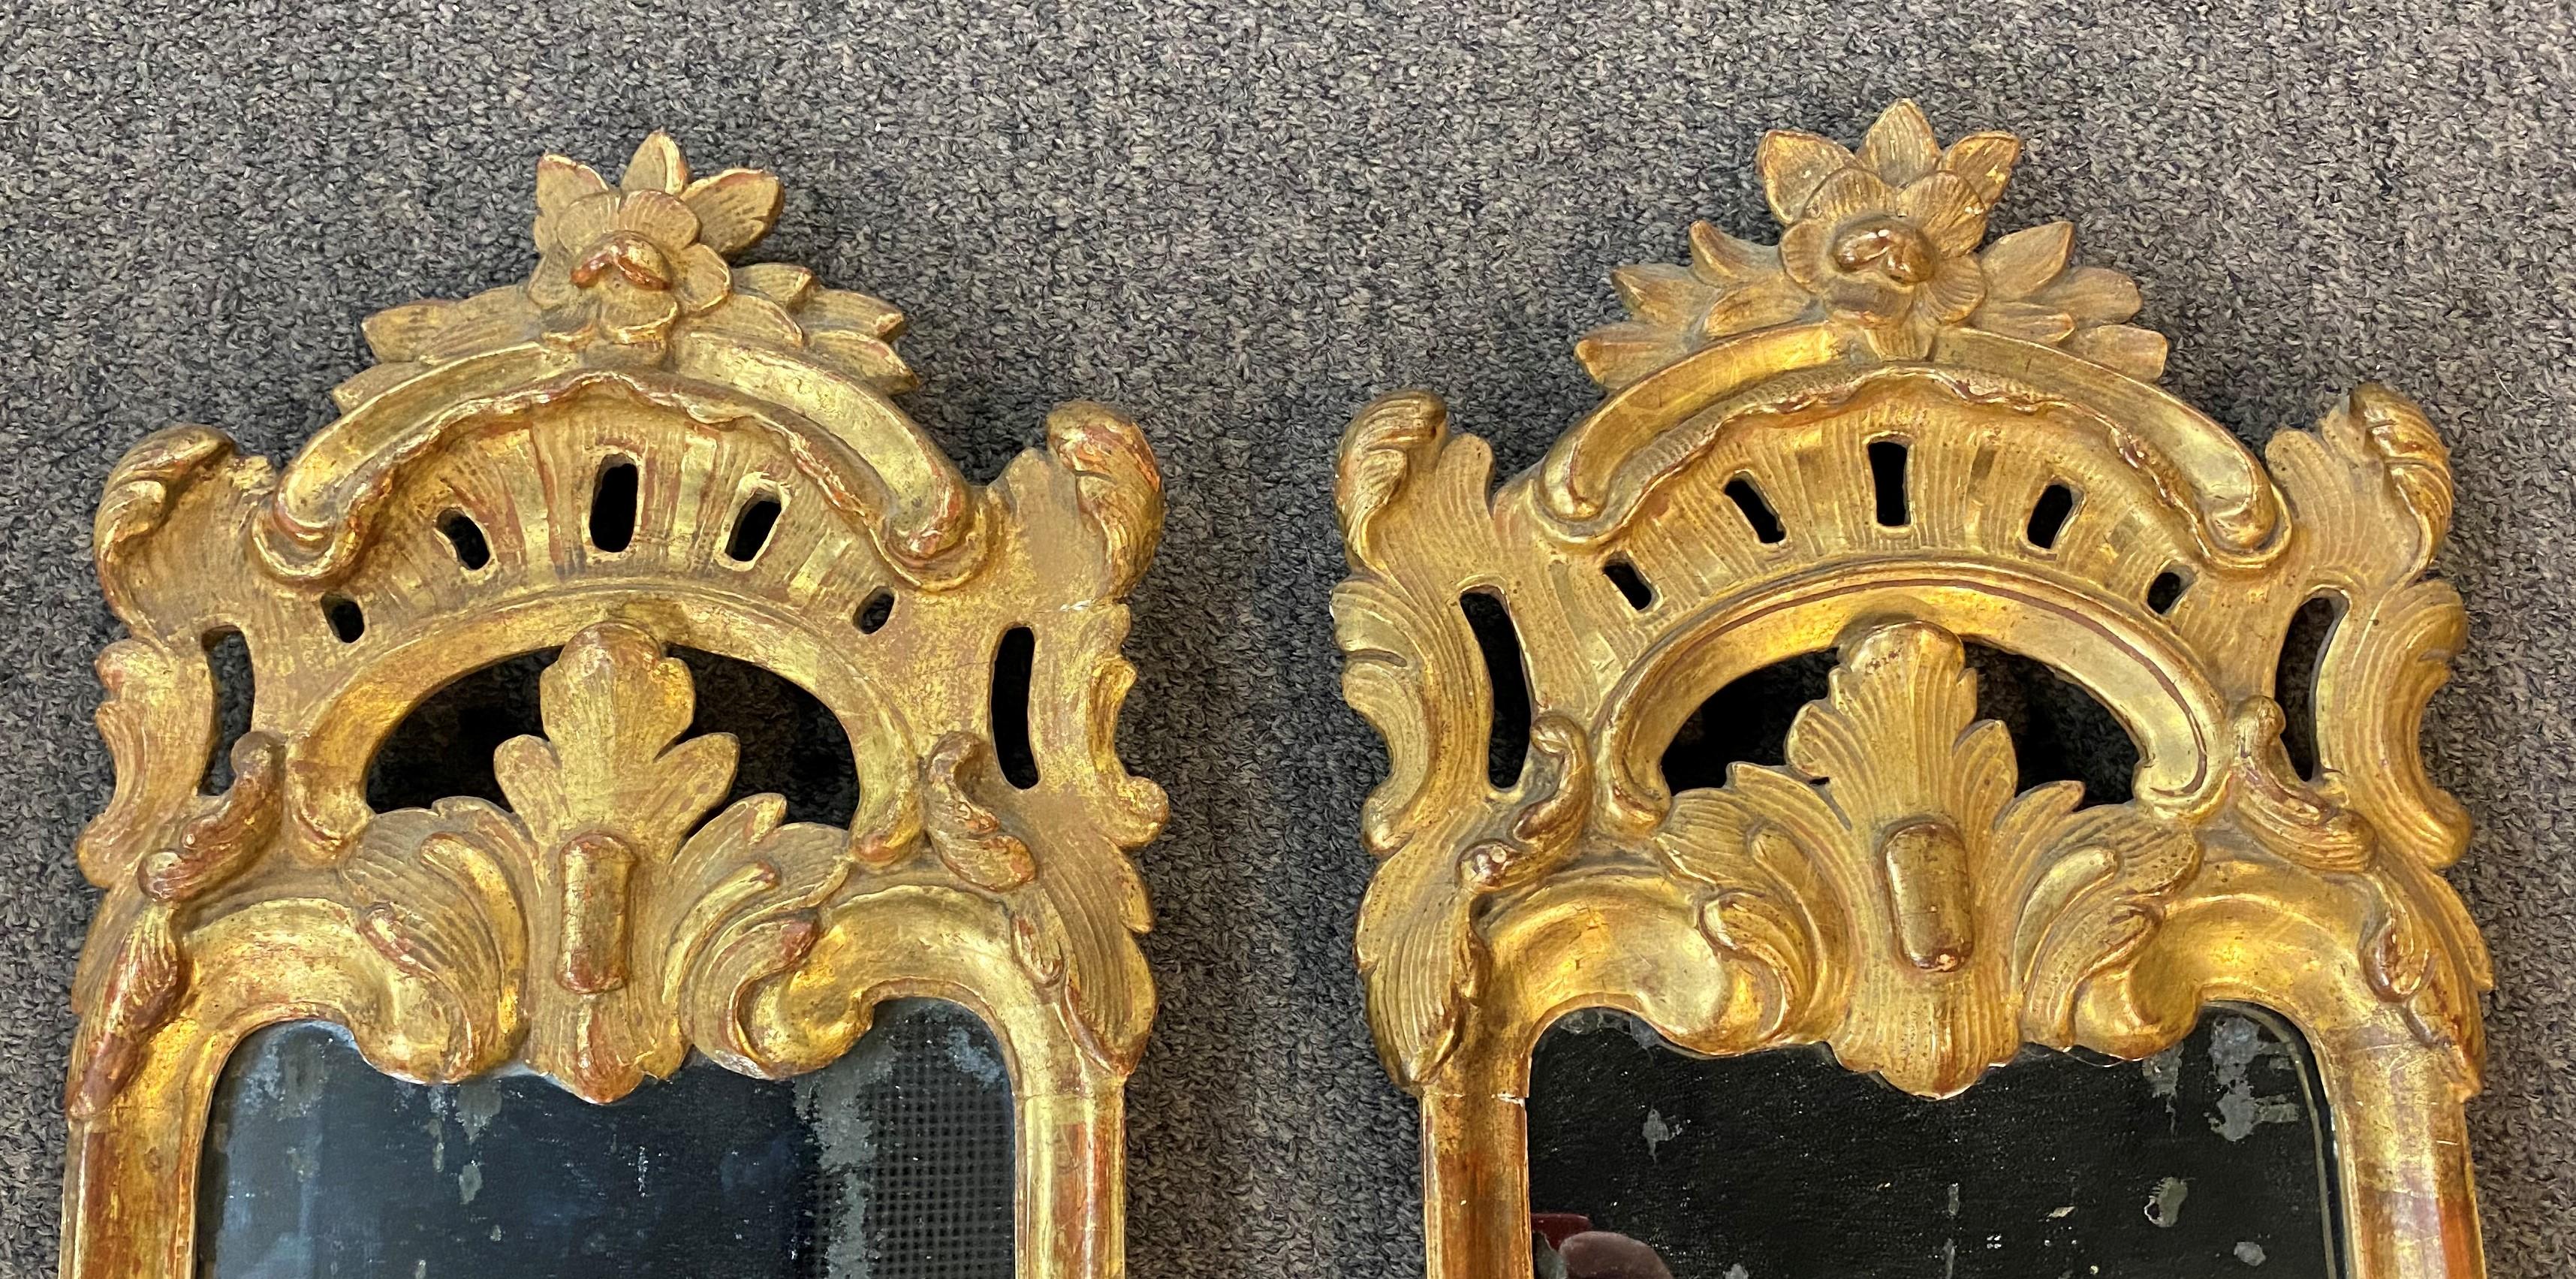 An exceptional pair of gilded Girandole mirrored wall sconces, likely Swedish, with brass candle arms, and original looking glass. The back of each shows and inscribed label, one with “Georg” and the other “Le Major Castiller Grenier (sp?)” The pair